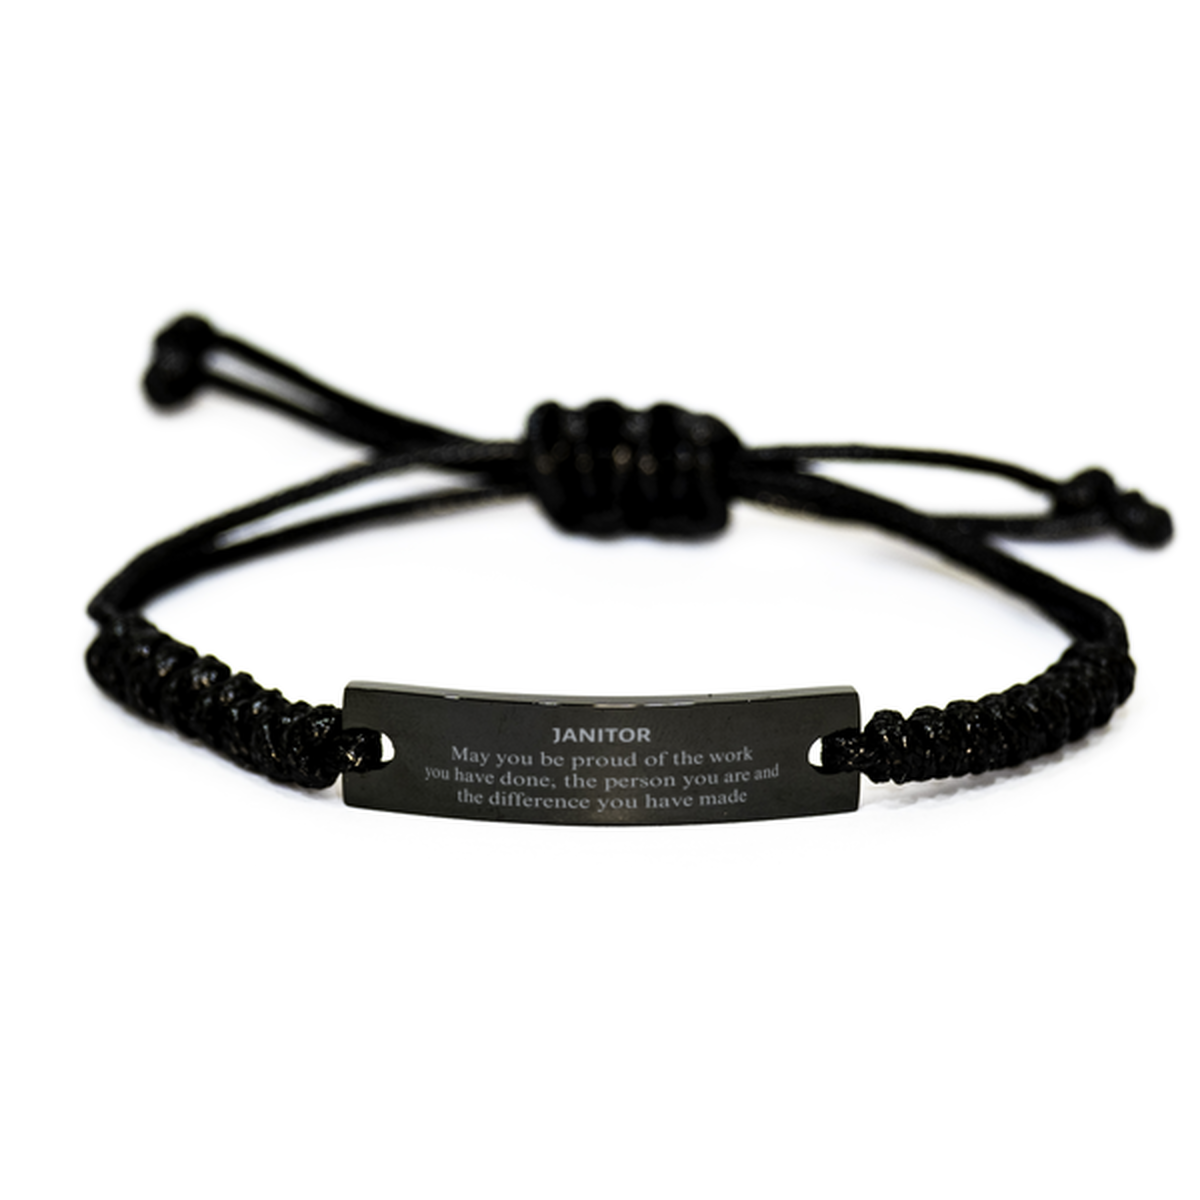 Janitor May you be proud of the work you have done, Retirement Janitor Black Rope Bracelet for Colleague Appreciation Gifts Amazing for Janitor